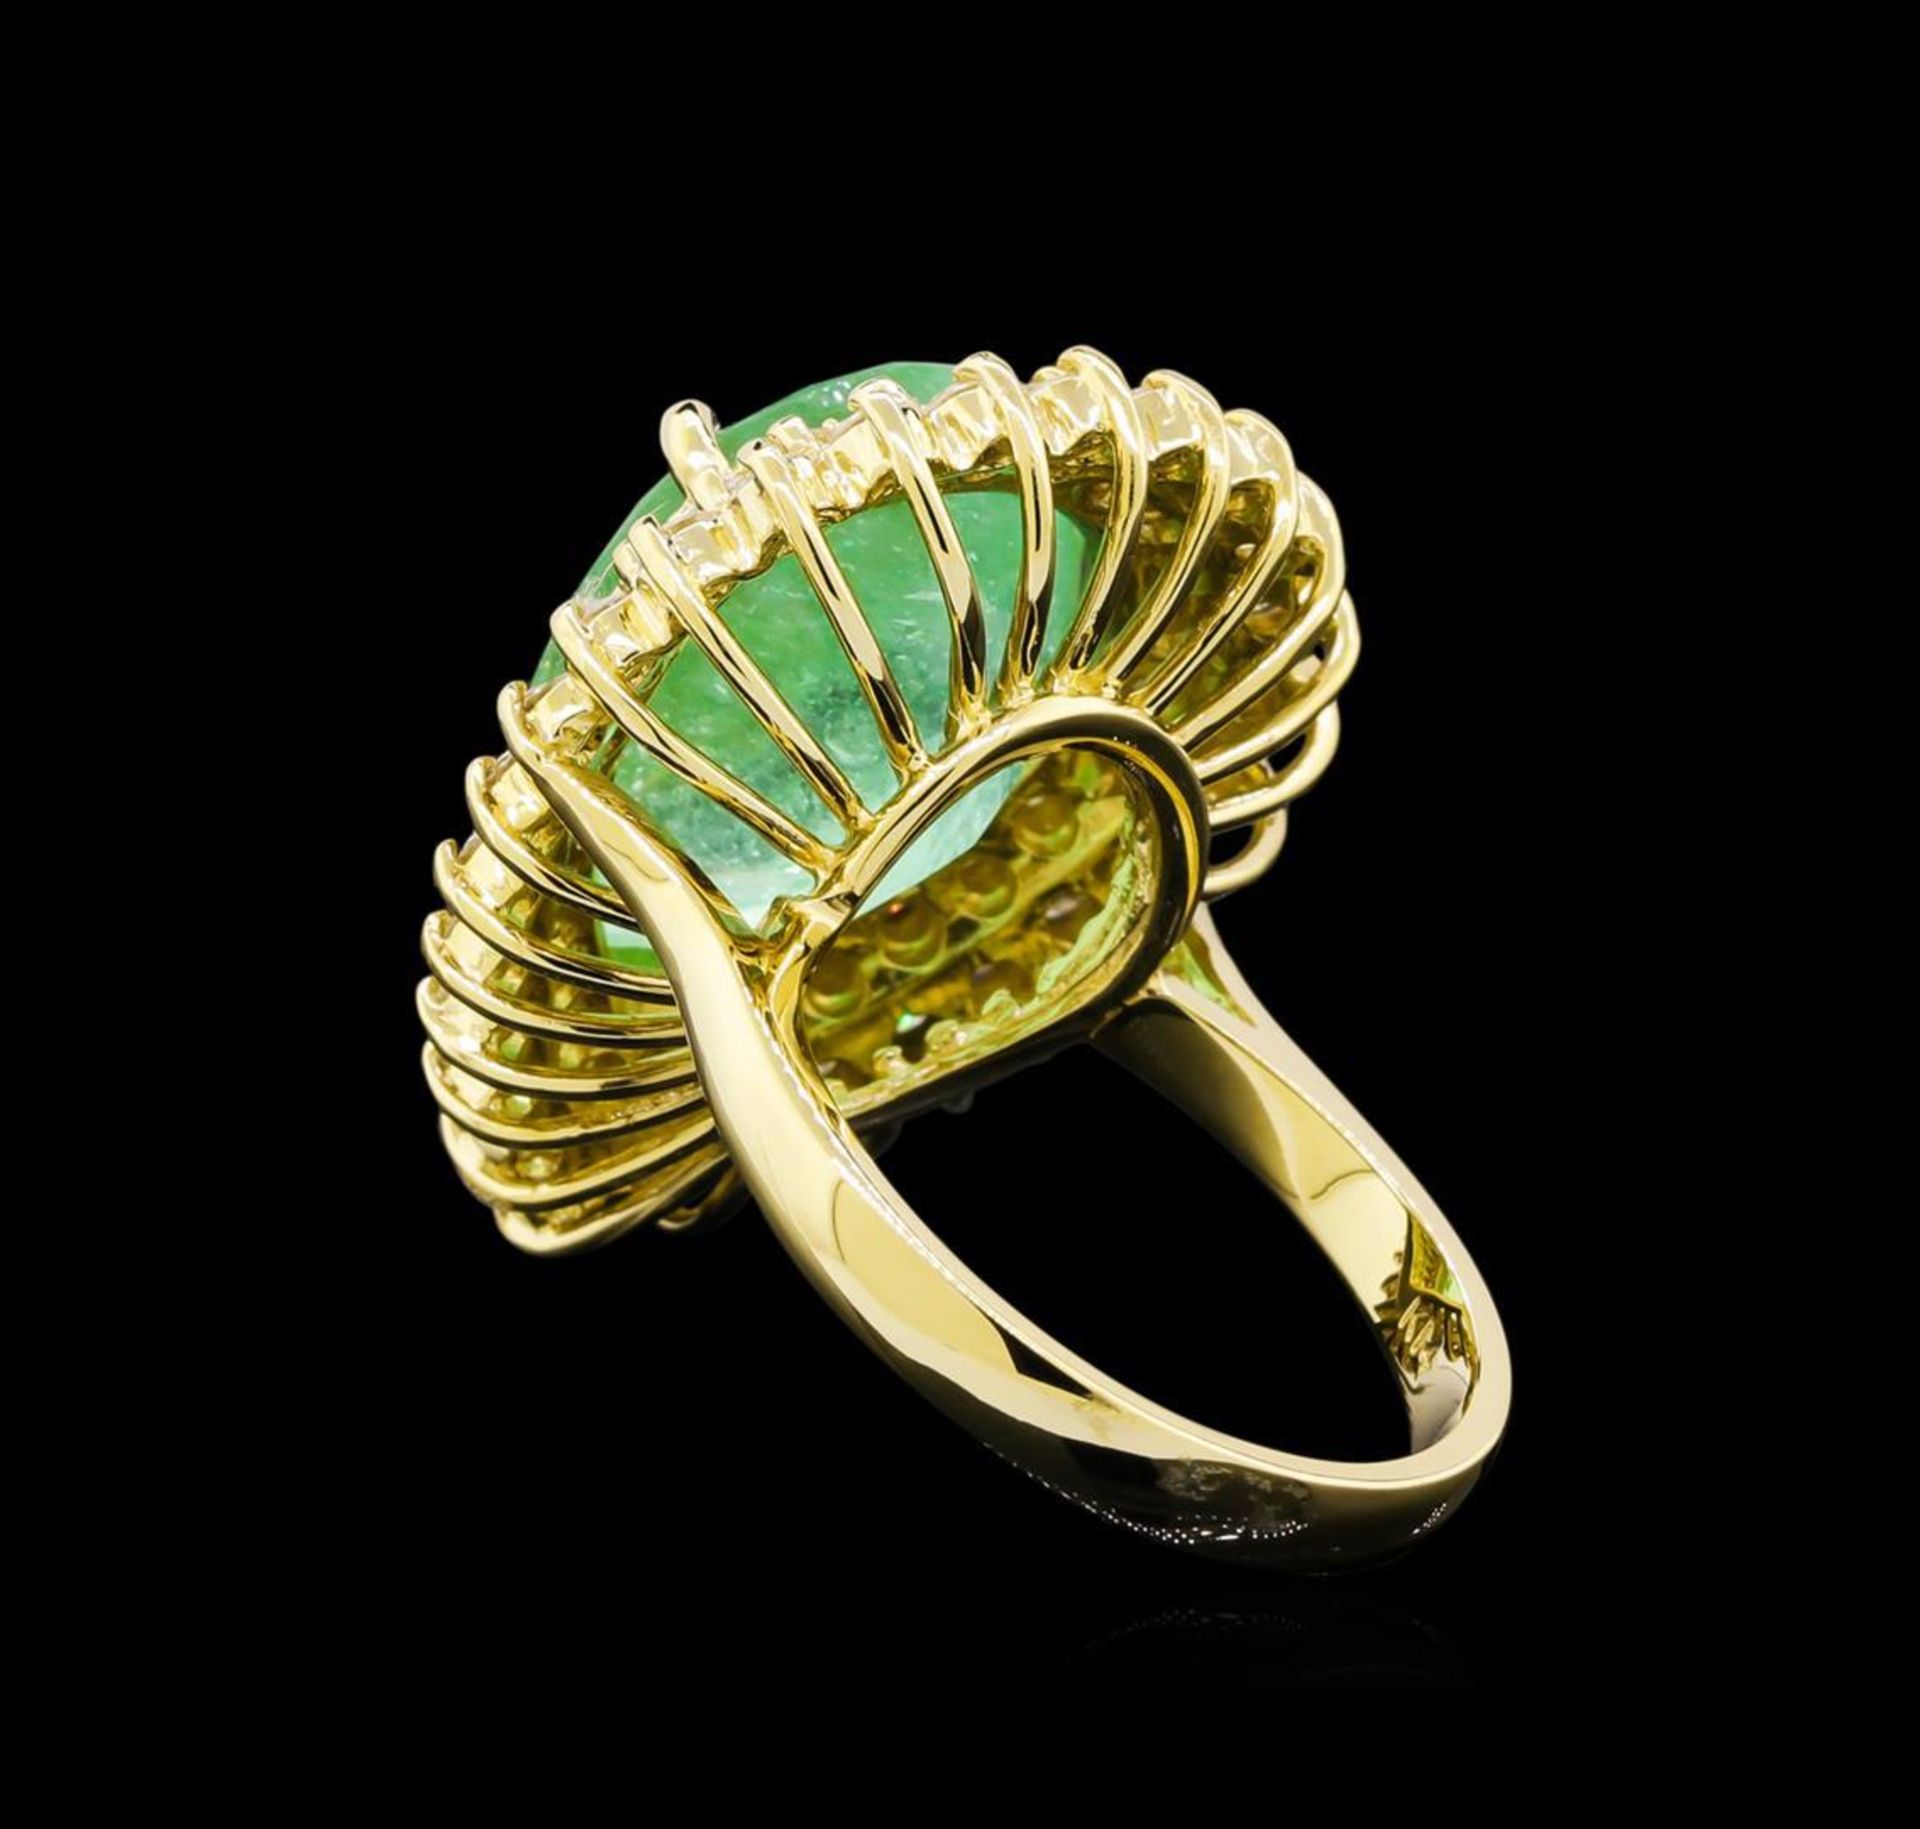 GIA Cert 9.78 ctw Emerald and Diamond Ring - 14KT Yellow Gold - Image 3 of 6